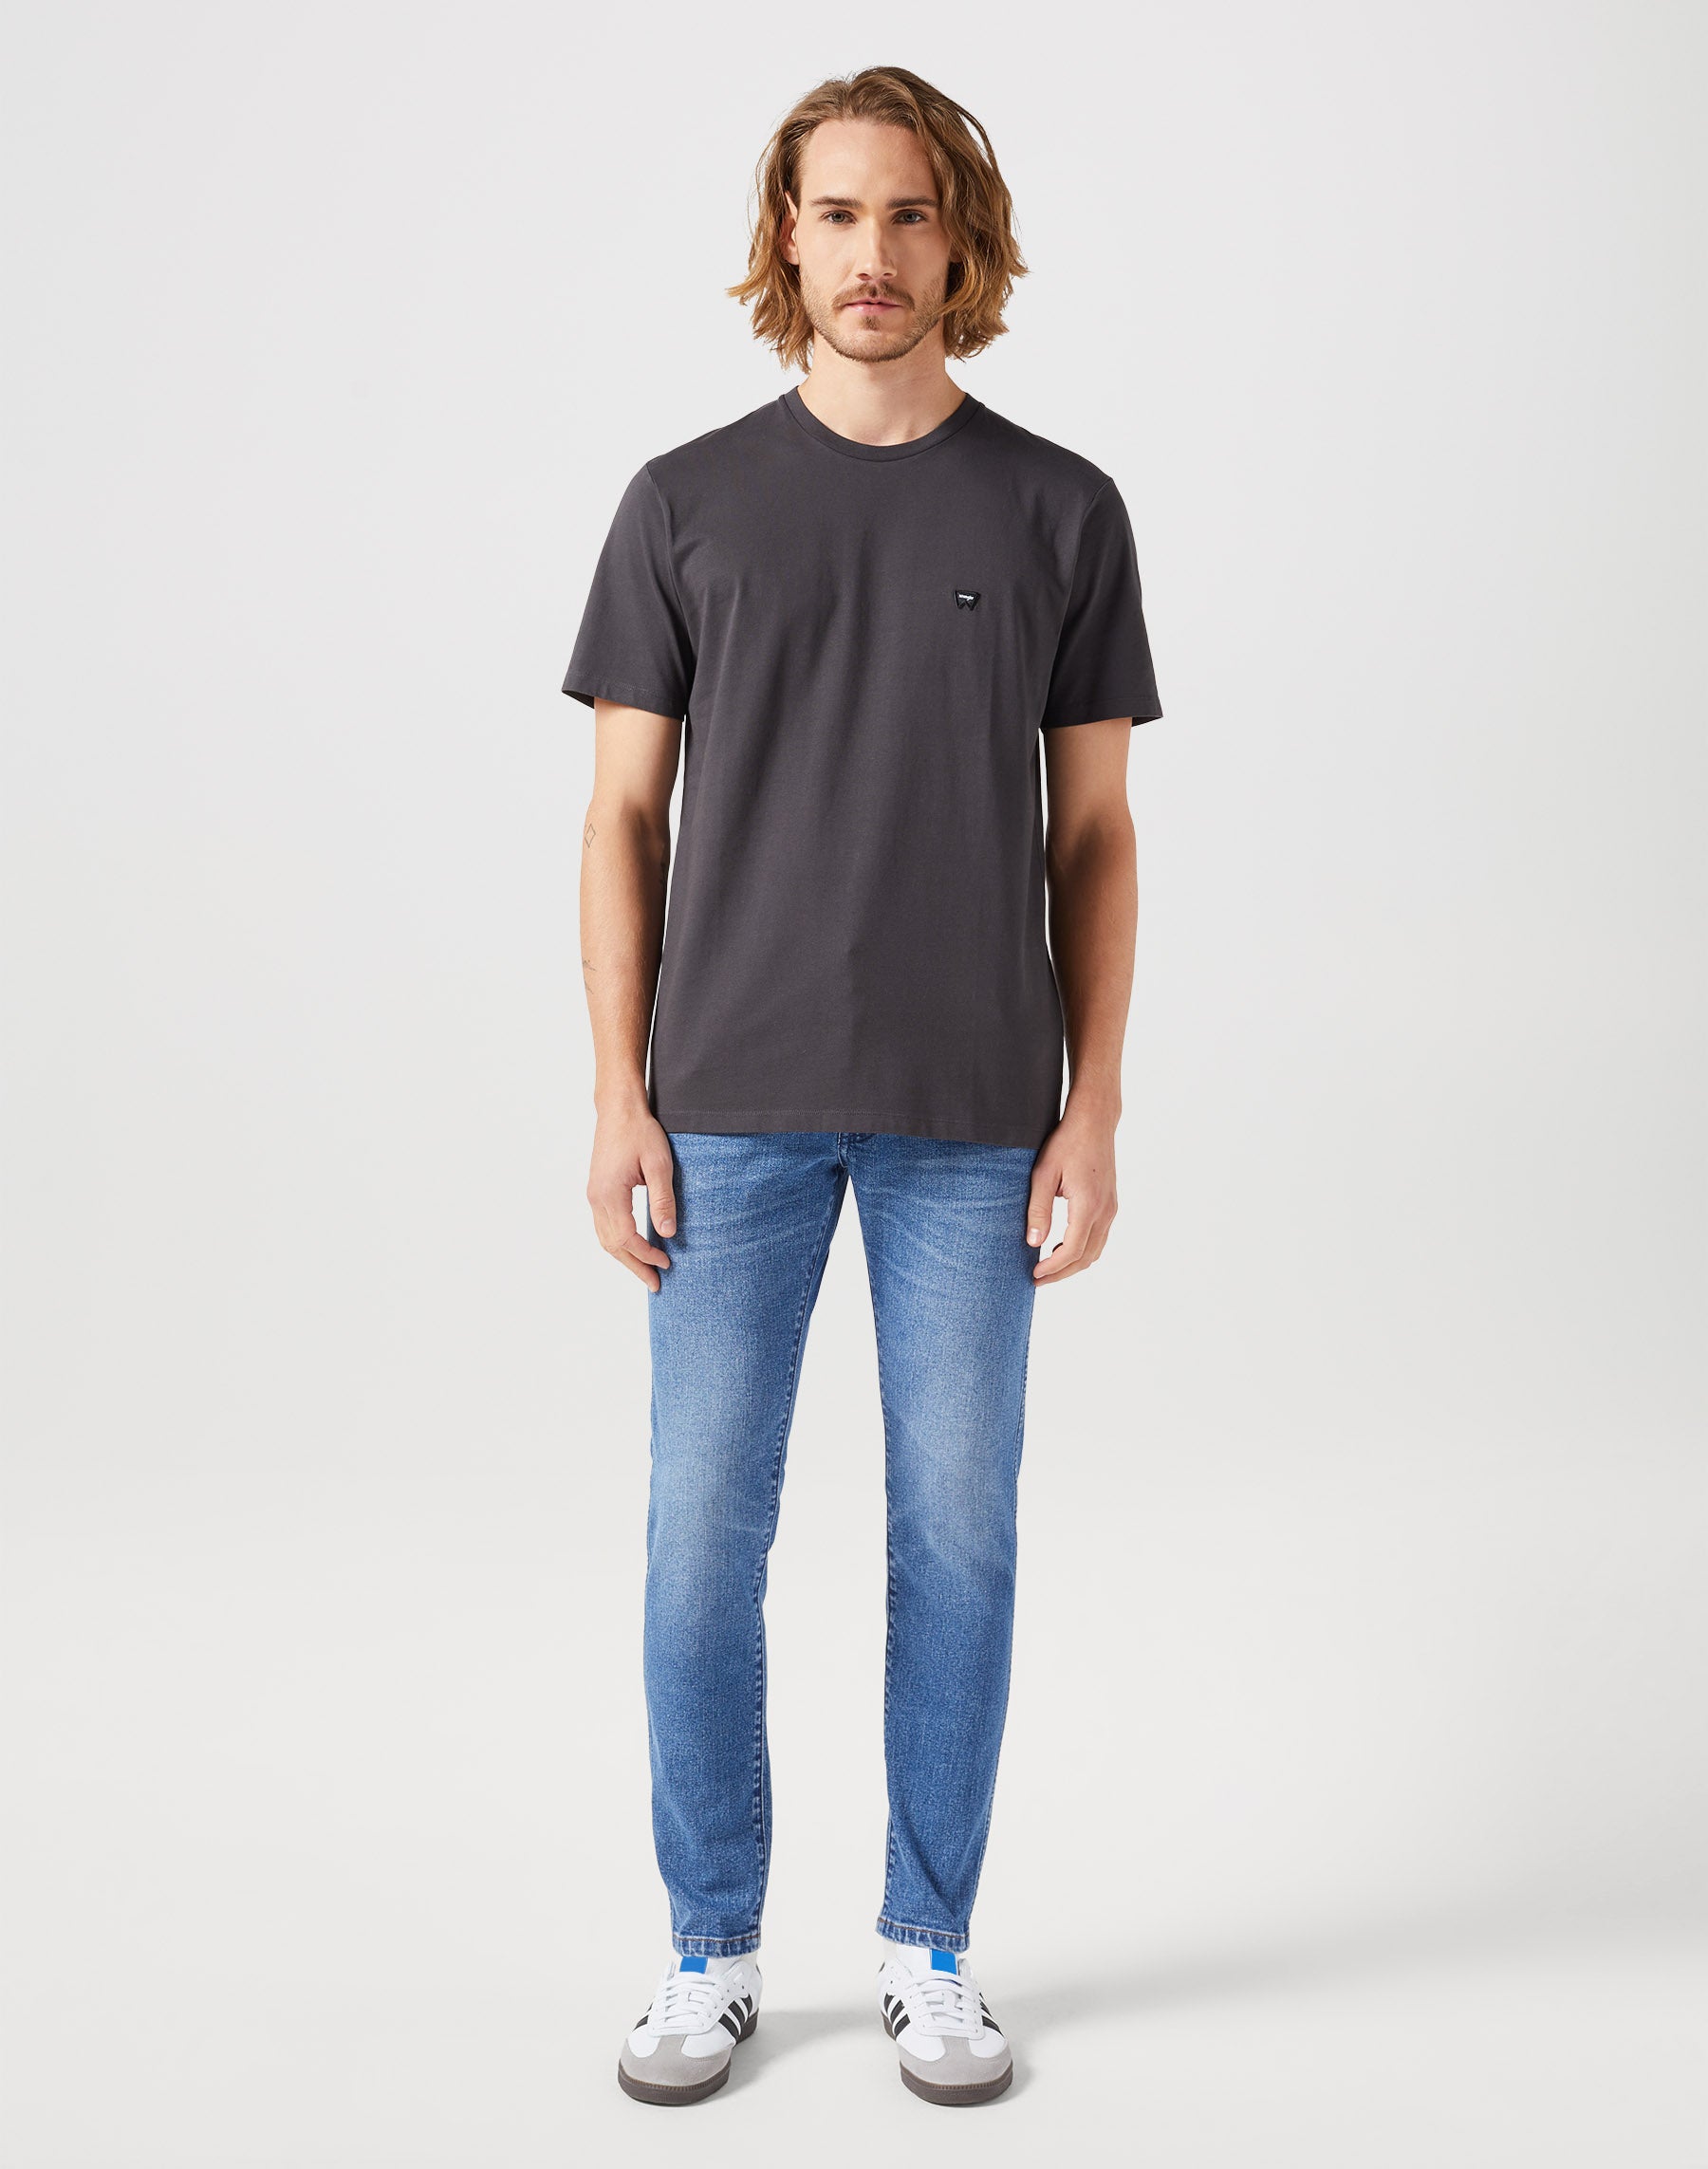 Sign Off Tee in Faded Black T-Shirts Wrangler   